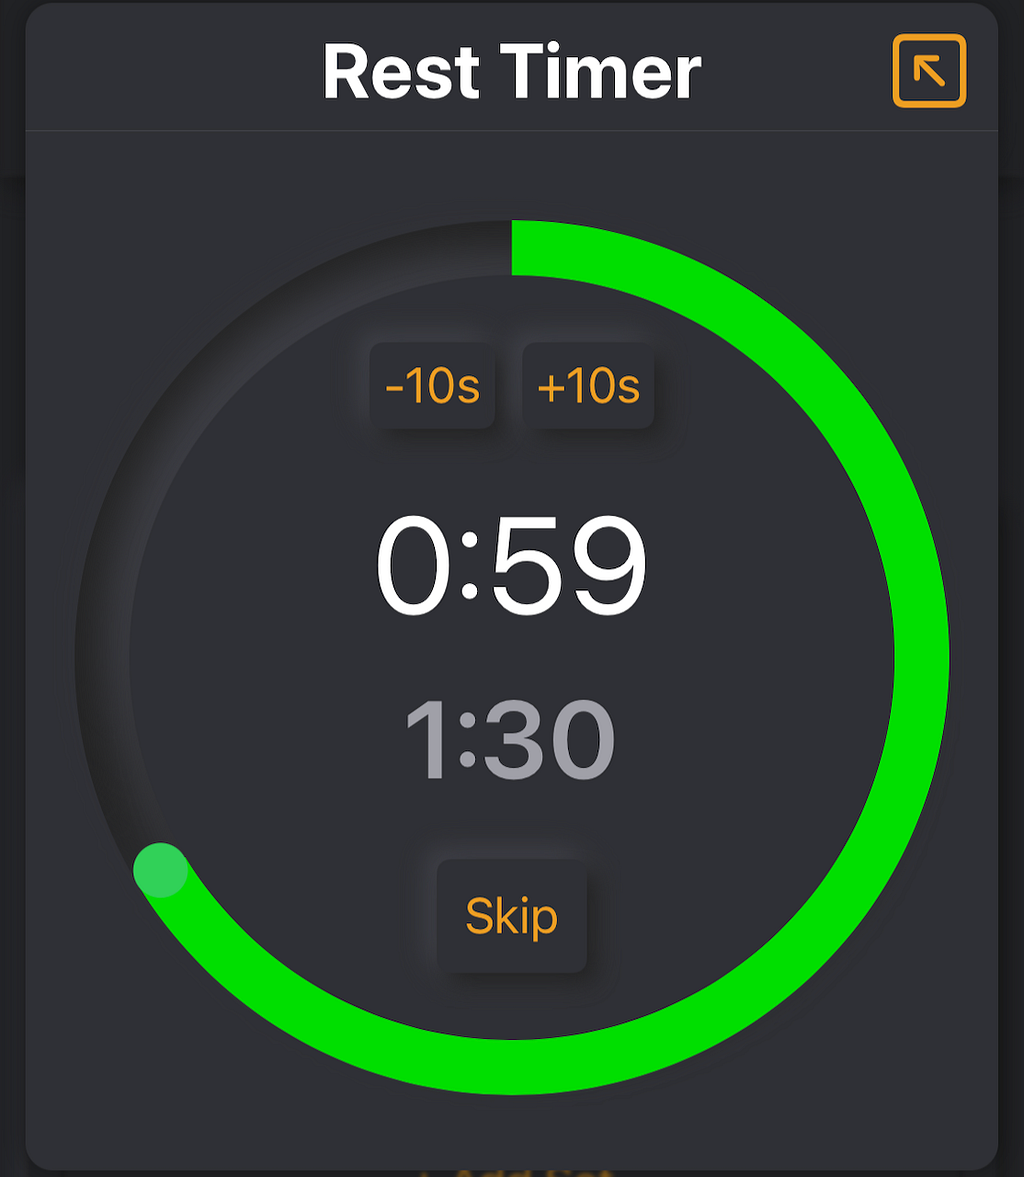 Rest Timer View